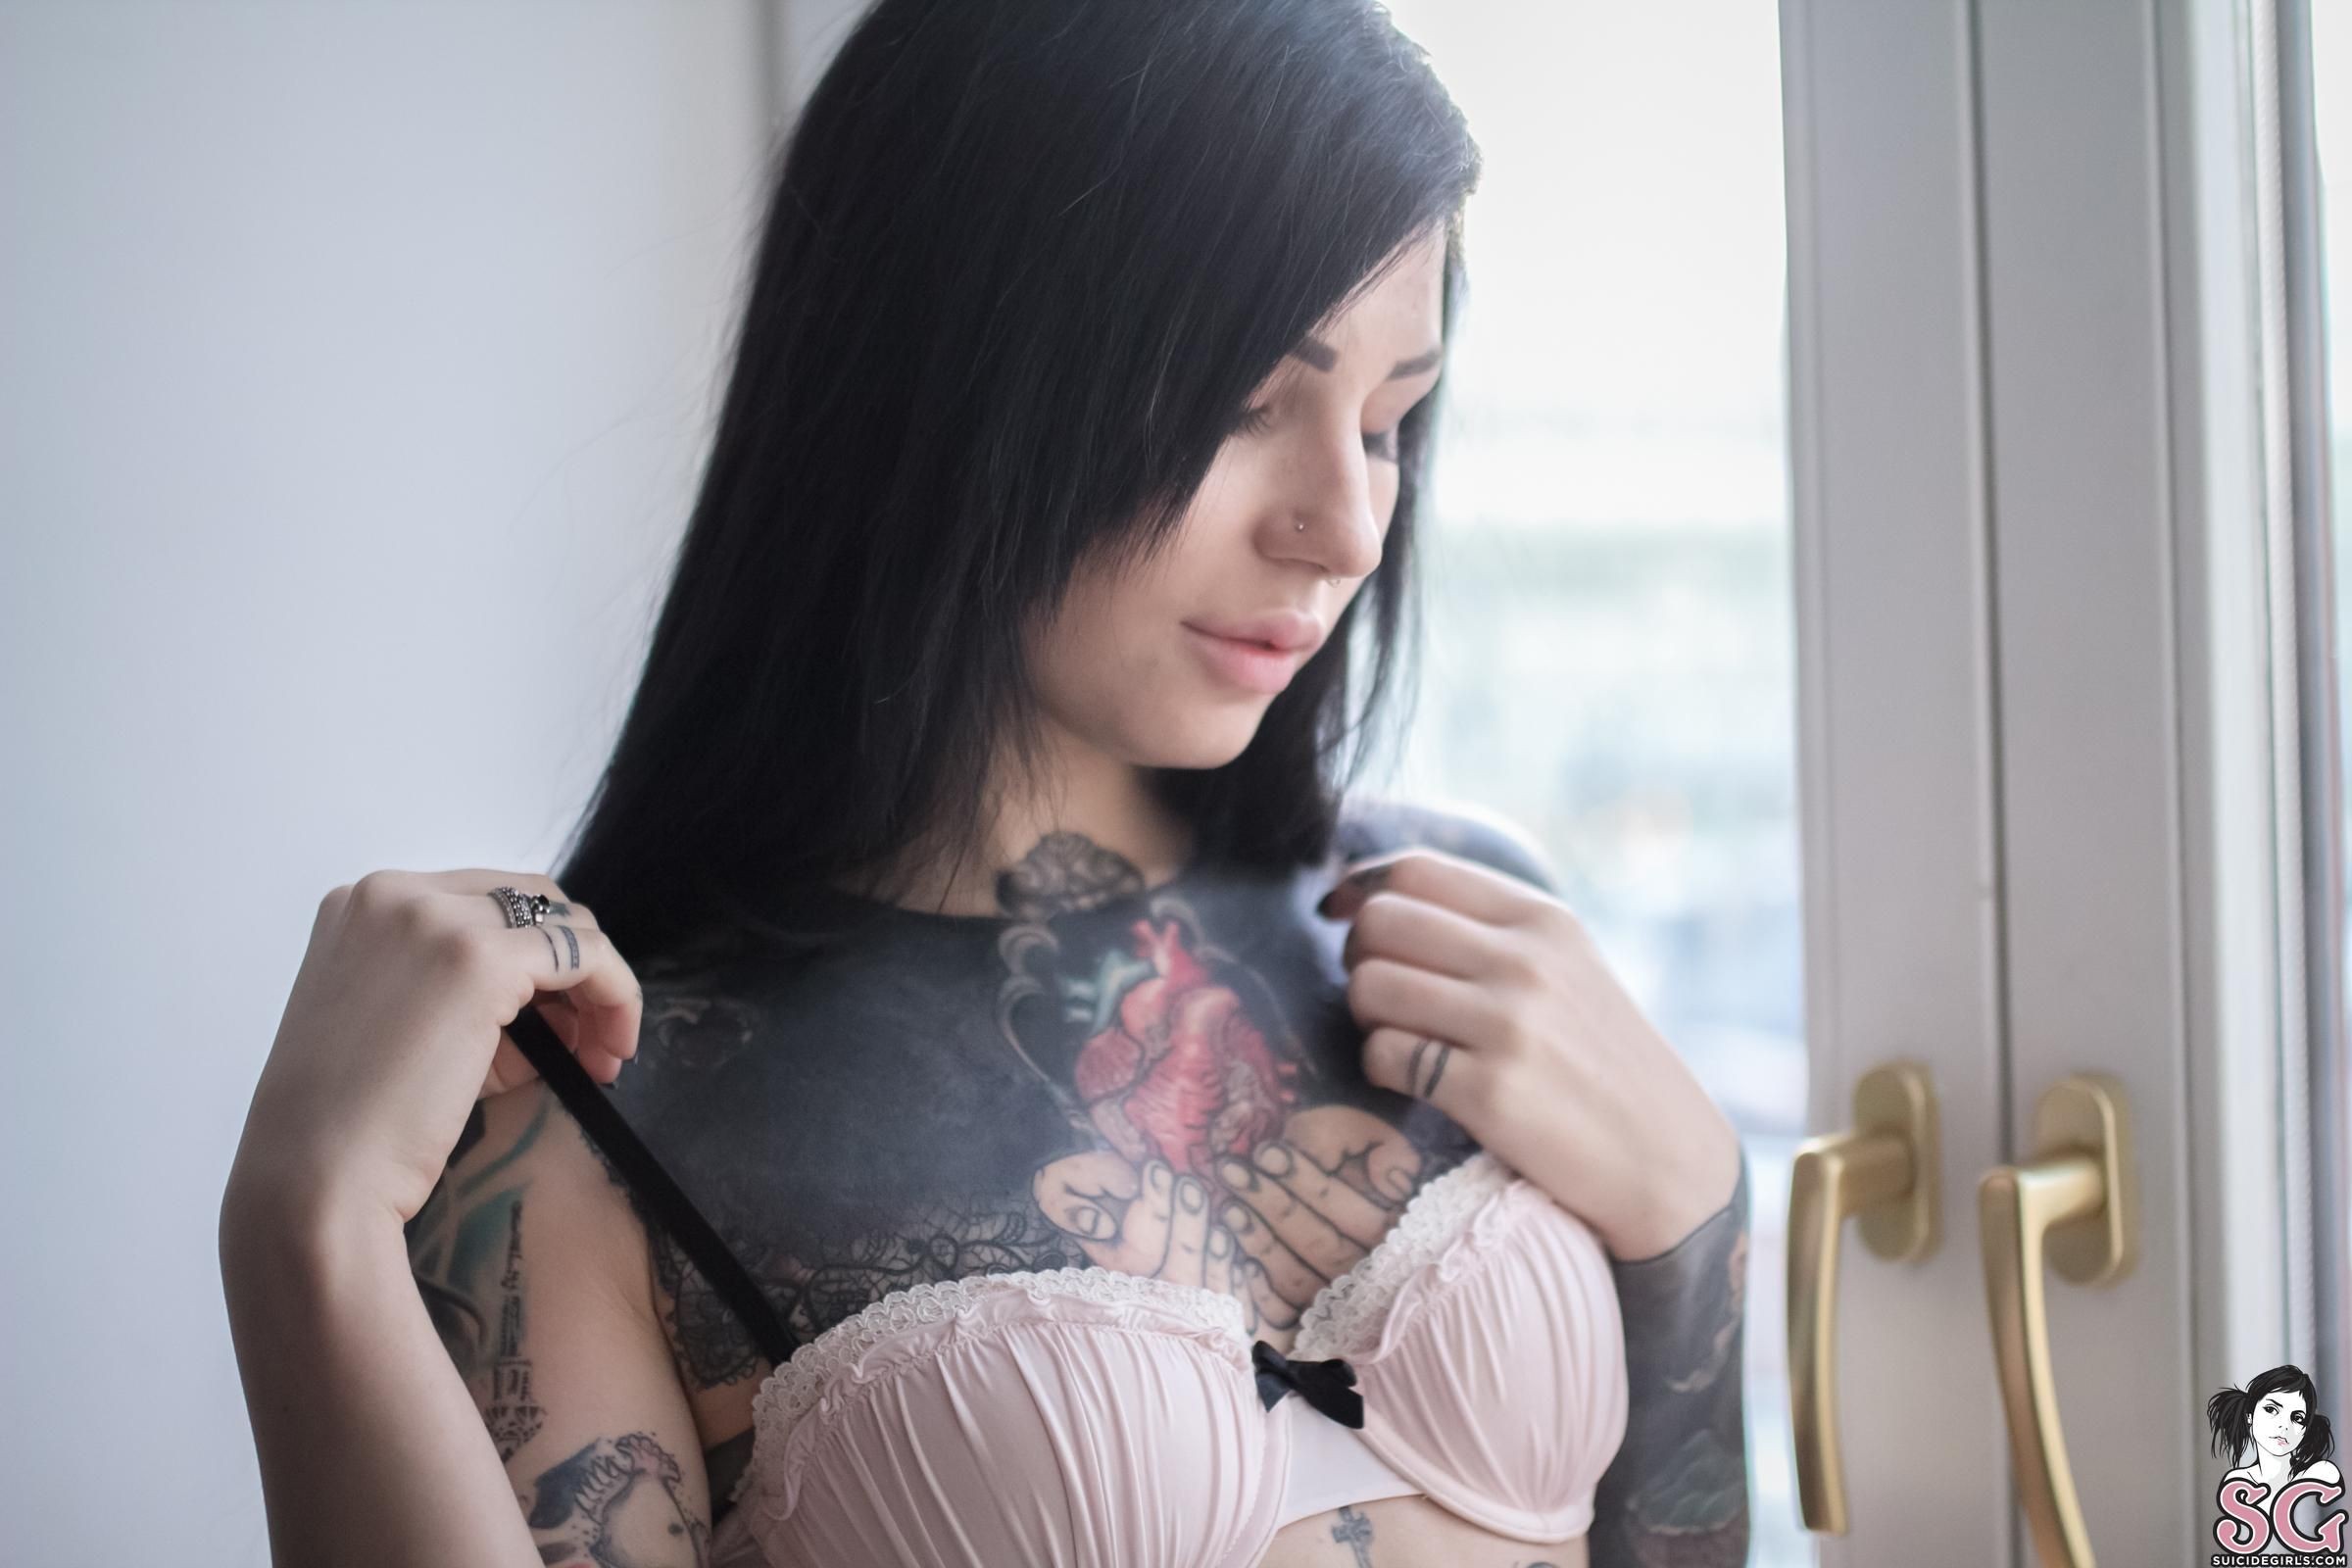 Beautiful Suicide Girl Chrisrayn Gentle Morning (12) HD 2400 px iPhone Imag...